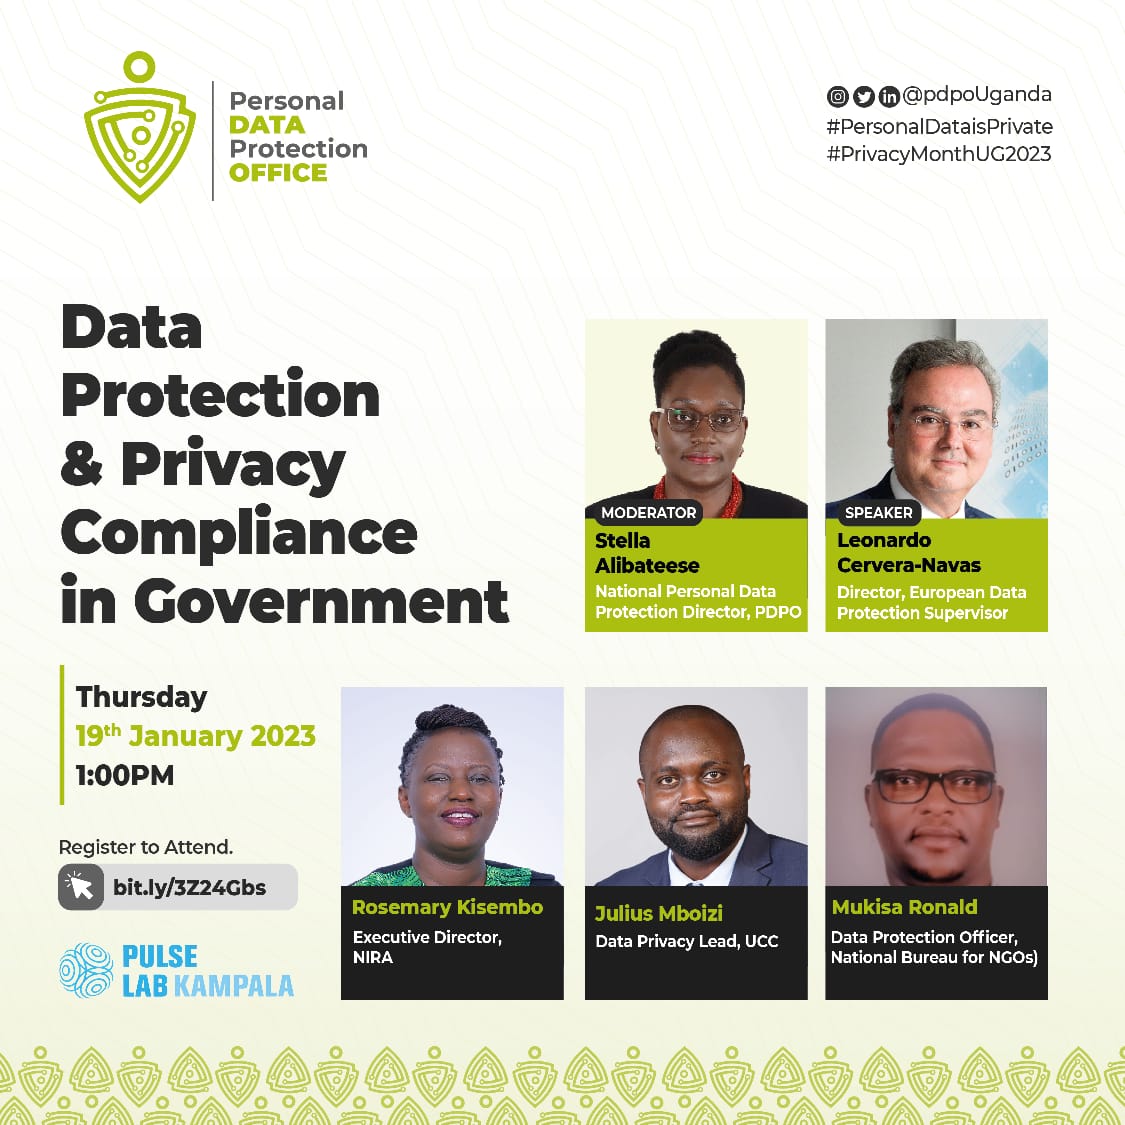 Our Senior Compliance Officer- Mr. Ronnie Mukisa will be a panelist at a Webinar on Data Protection & Privacy Compliance in government on 19th Jan 2023 at 1:00 pm.      #PrivacyMonthUG2023 #PersonalDataisPrivate